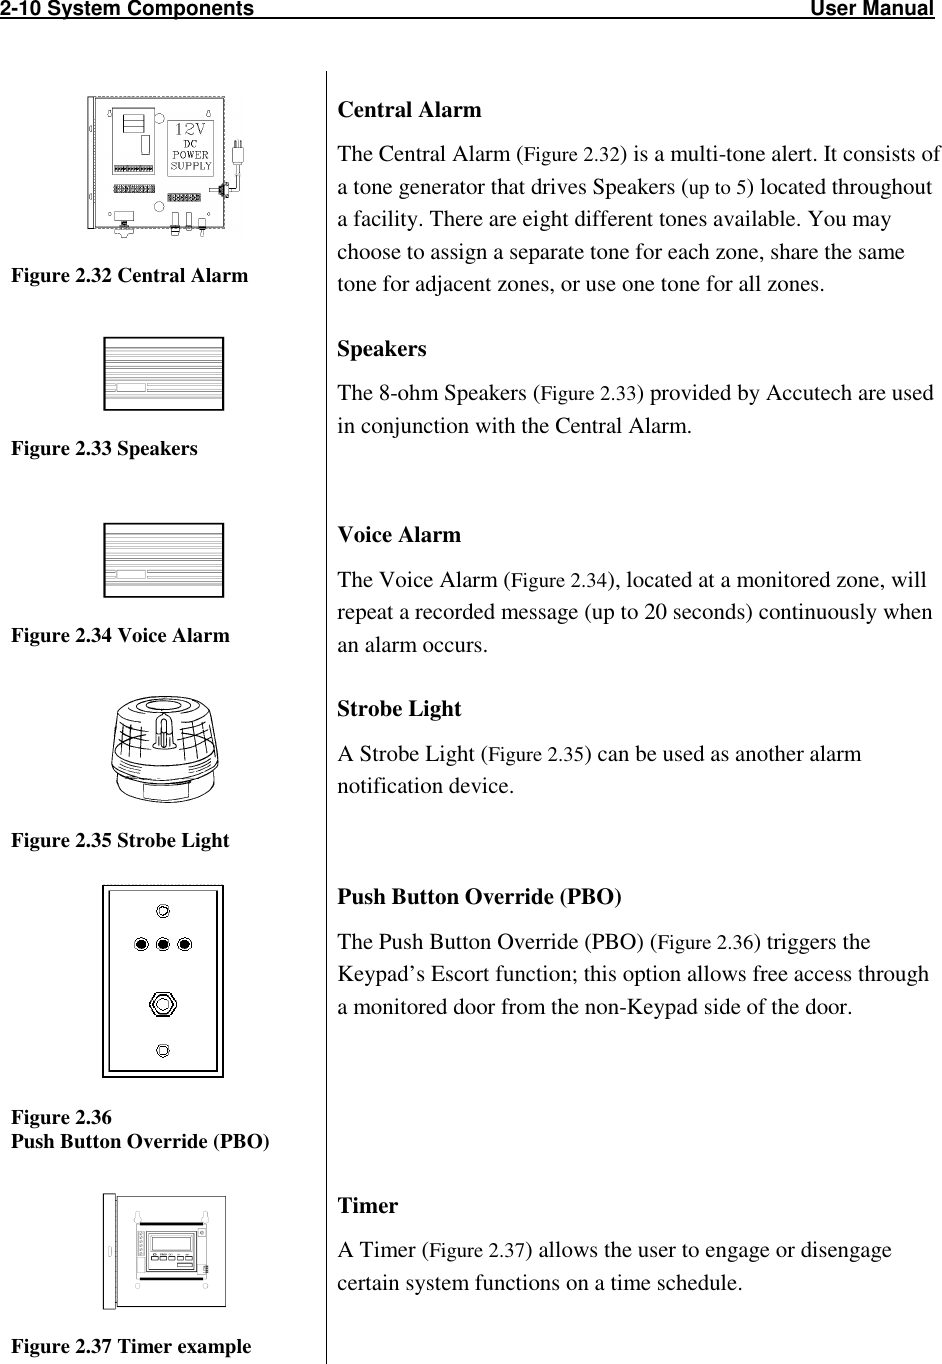 2-10 System Components                                                                                                User Manual                             Figure 2.32 Central Alarm Central Alarm The Central Alarm (Figure 2.32) is a multi-tone alert. It consists of a tone generator that drives Speakers (up to 5) located throughout a facility. There are eight different tones available. You may choose to assign a separate tone for each zone, share the same tone for adjacent zones, or use one tone for all zones.   Figure 2.33 Speakers Speakers The 8-ohm Speakers (Figure 2.33) provided by Accutech are used in conjunction with the Central Alarm.   Figure 2.34 Voice Alarm Voice Alarm The Voice Alarm (Figure 2.34), located at a monitored zone, will repeat a recorded message (up to 20 seconds) continuously when an alarm occurs.  Figure 2.35 Strobe Light Strobe Light A Strobe Light (Figure 2.35) can be used as another alarm notification device.     Figure 2.36 Push Button Override (PBO) Push Button Override (PBO) The Push Button Override (PBO) (Figure 2.36) triggers the Keypad’s Escort function; this option allows free access through a monitored door from the non-Keypad side of the door.     Figure 2.37 Timer example Timer  A Timer (Figure 2.37) allows the user to engage or disengage certain system functions on a time schedule.  